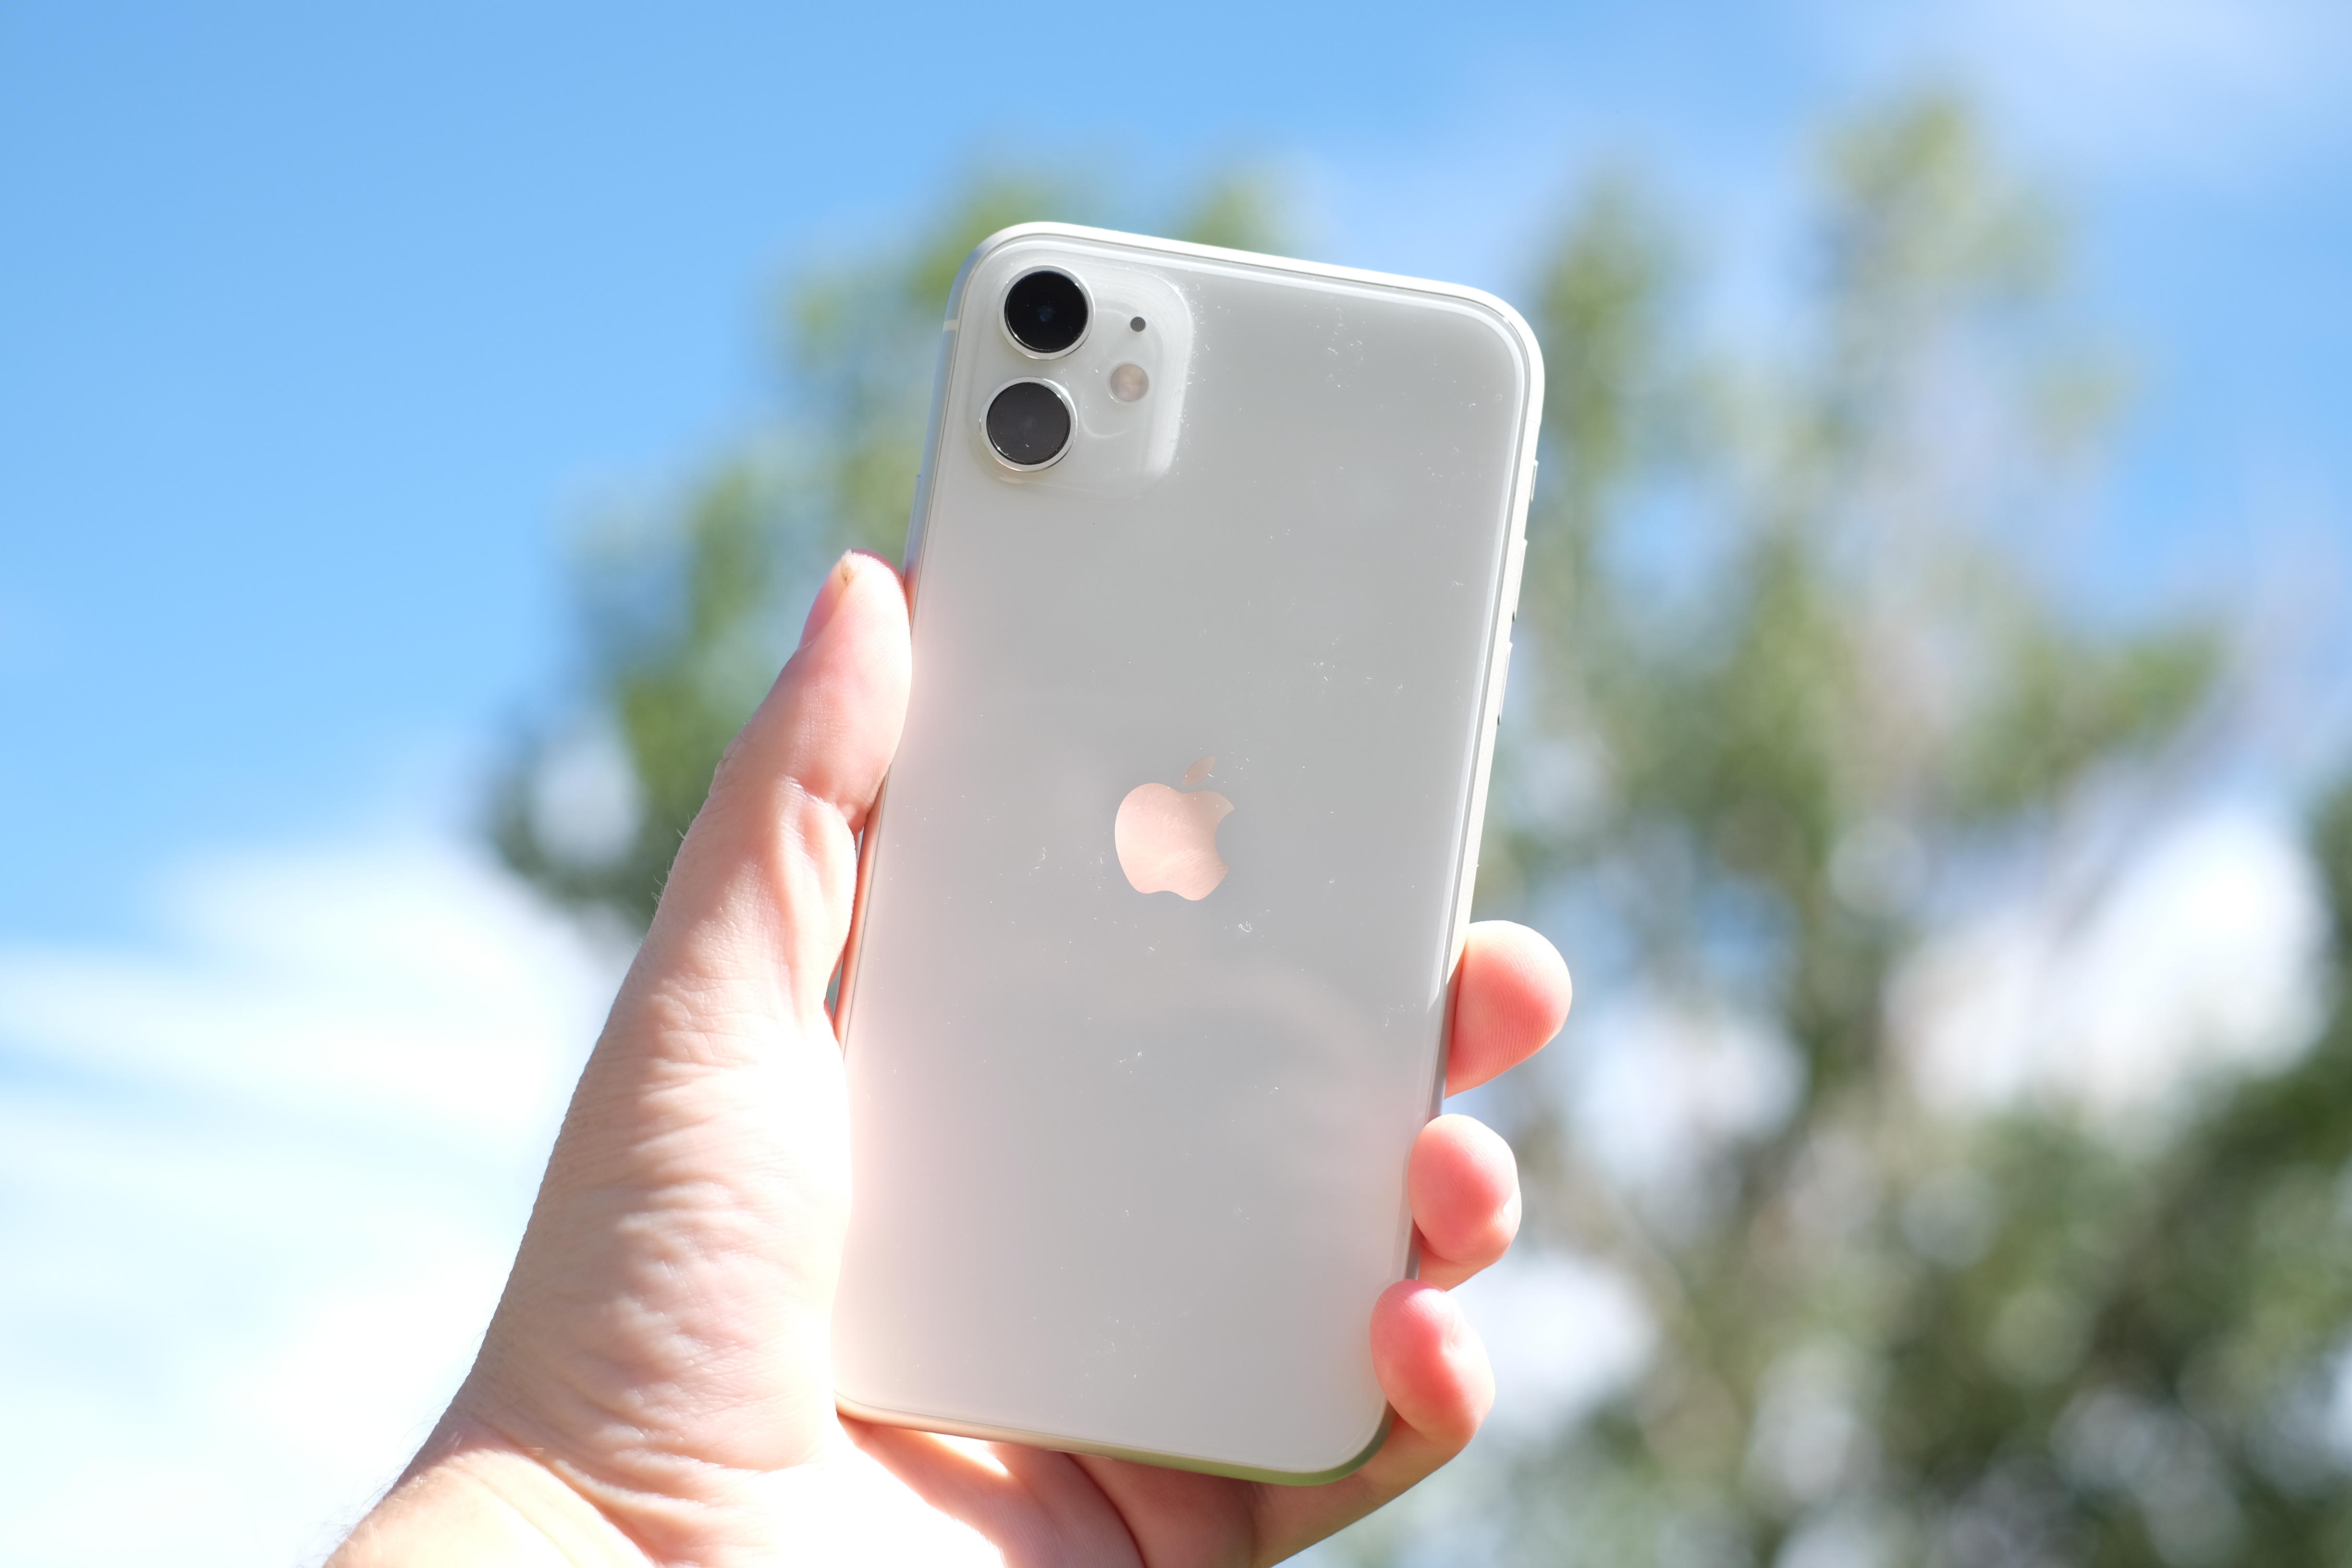 iPhone 11 review: The best iPhone for most people | ZDNET